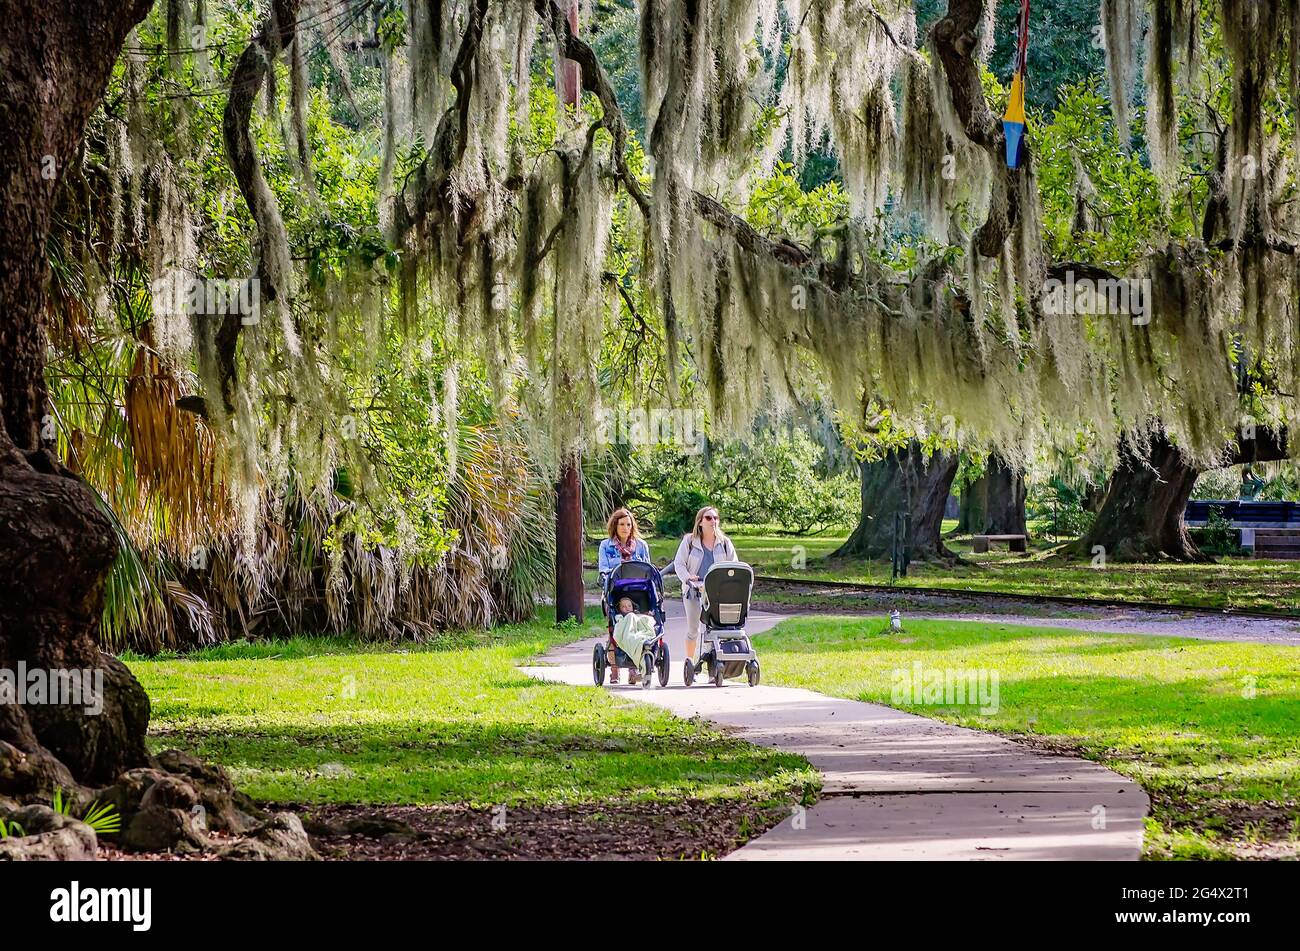 Women push baby strollers through the historic oak grove in New Orleans City Park, Nov. 14, 2015, in New Orleans, Louisiana. Stock Photo